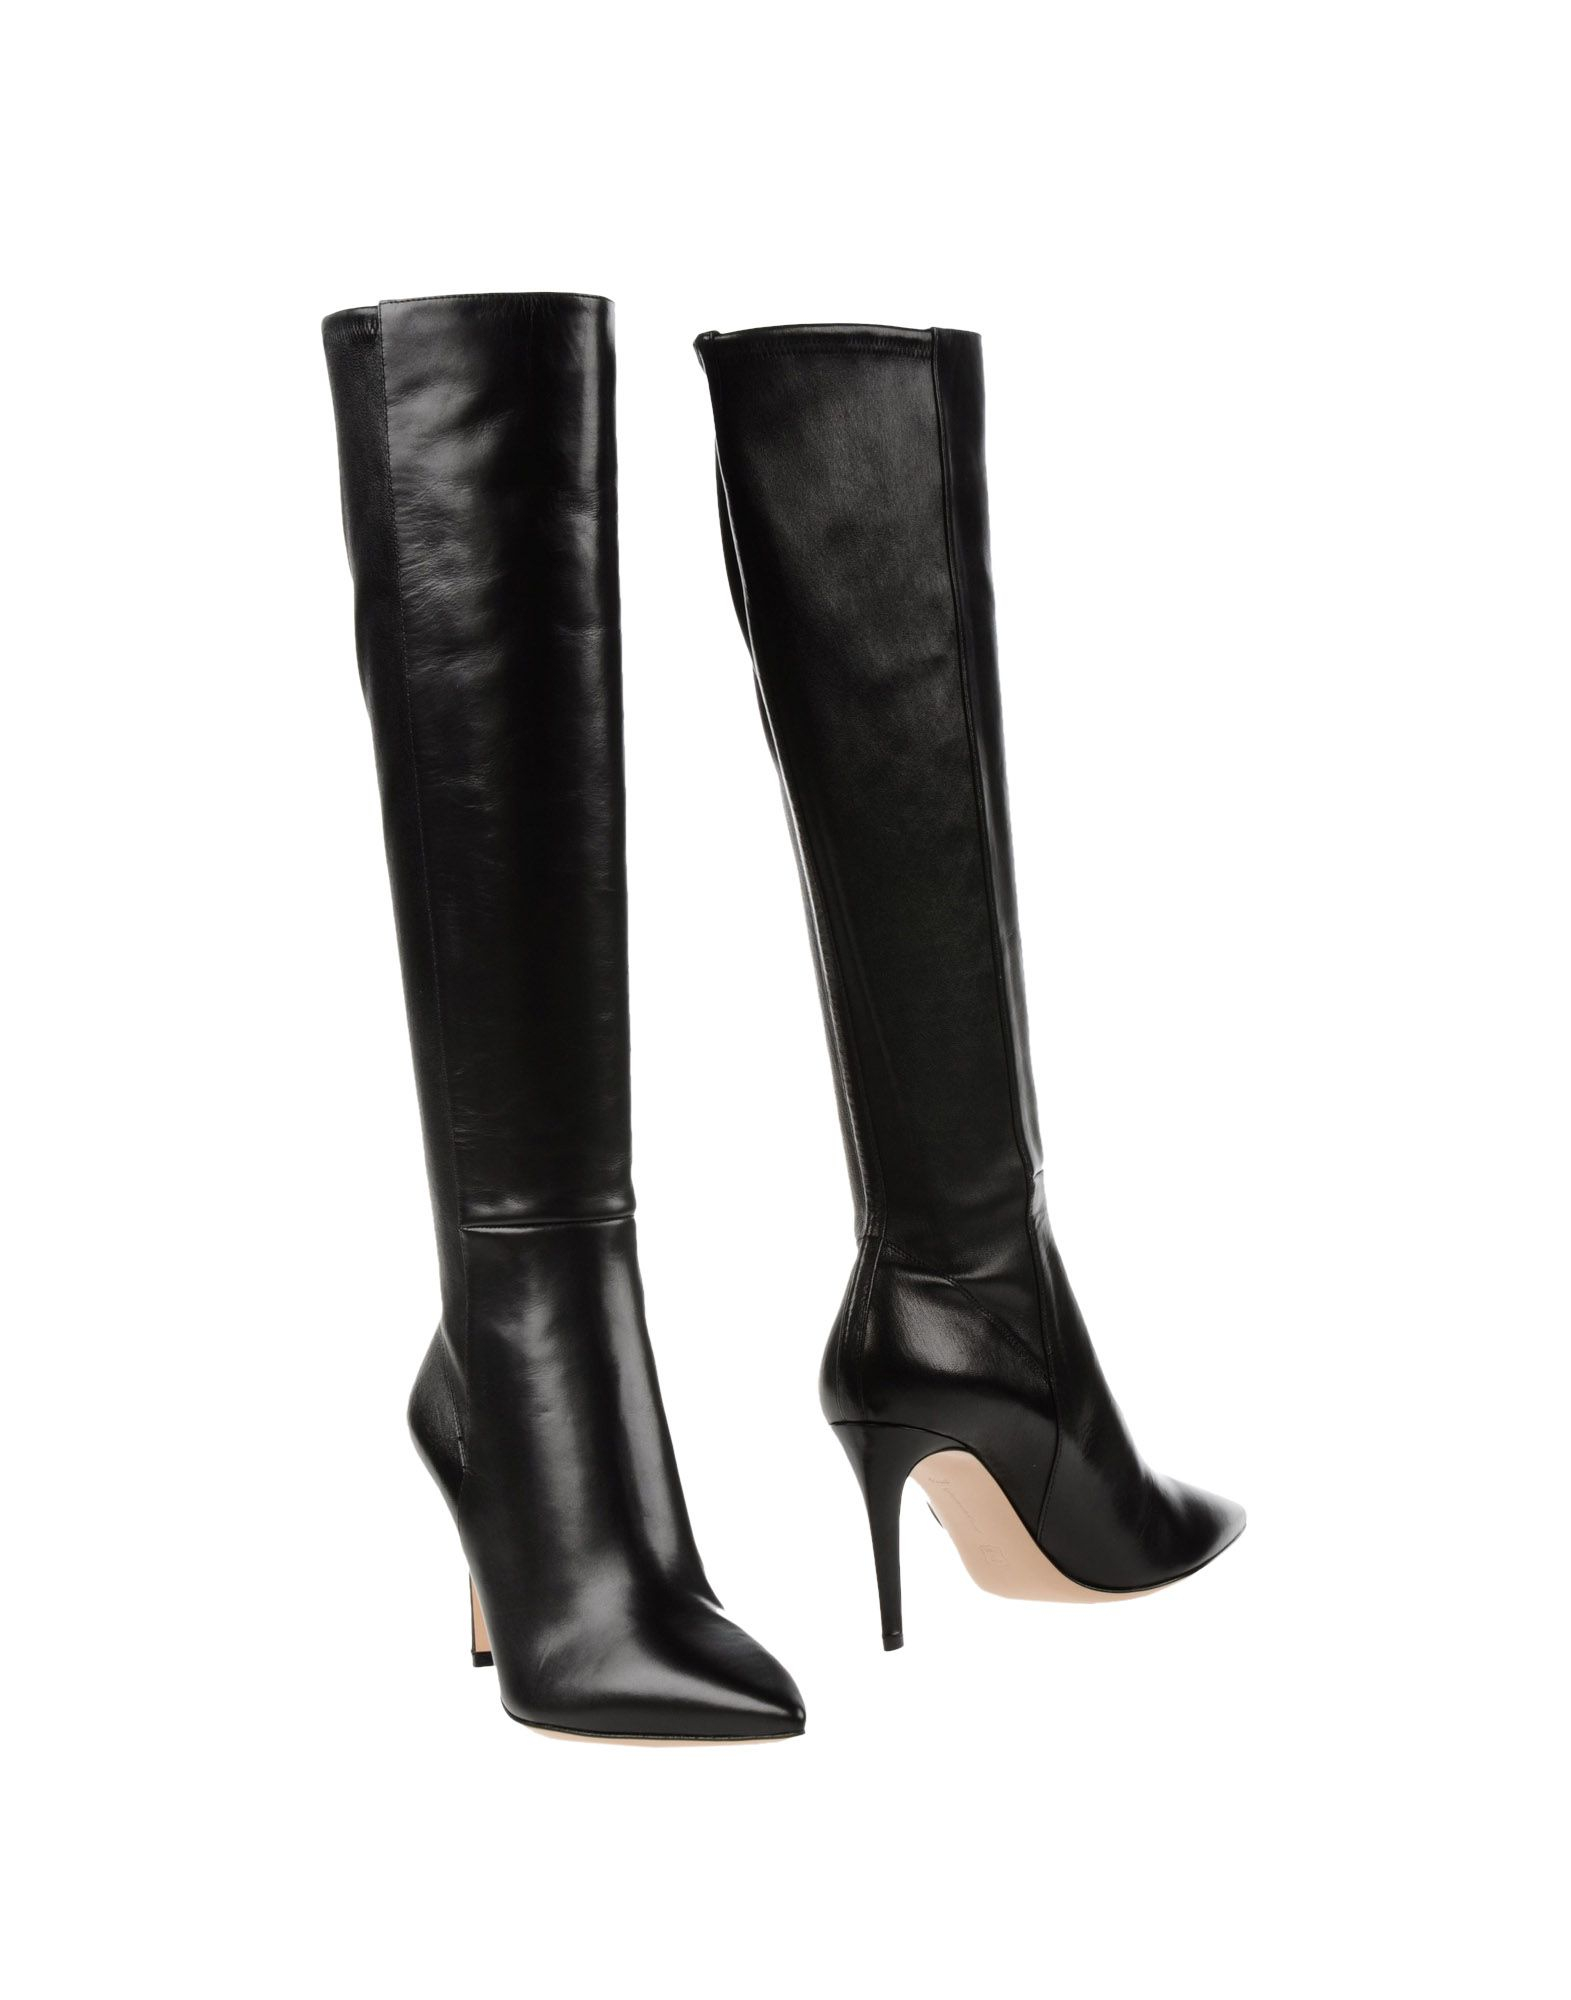 christian louboutin leather knee high boots Black pointed toes ...